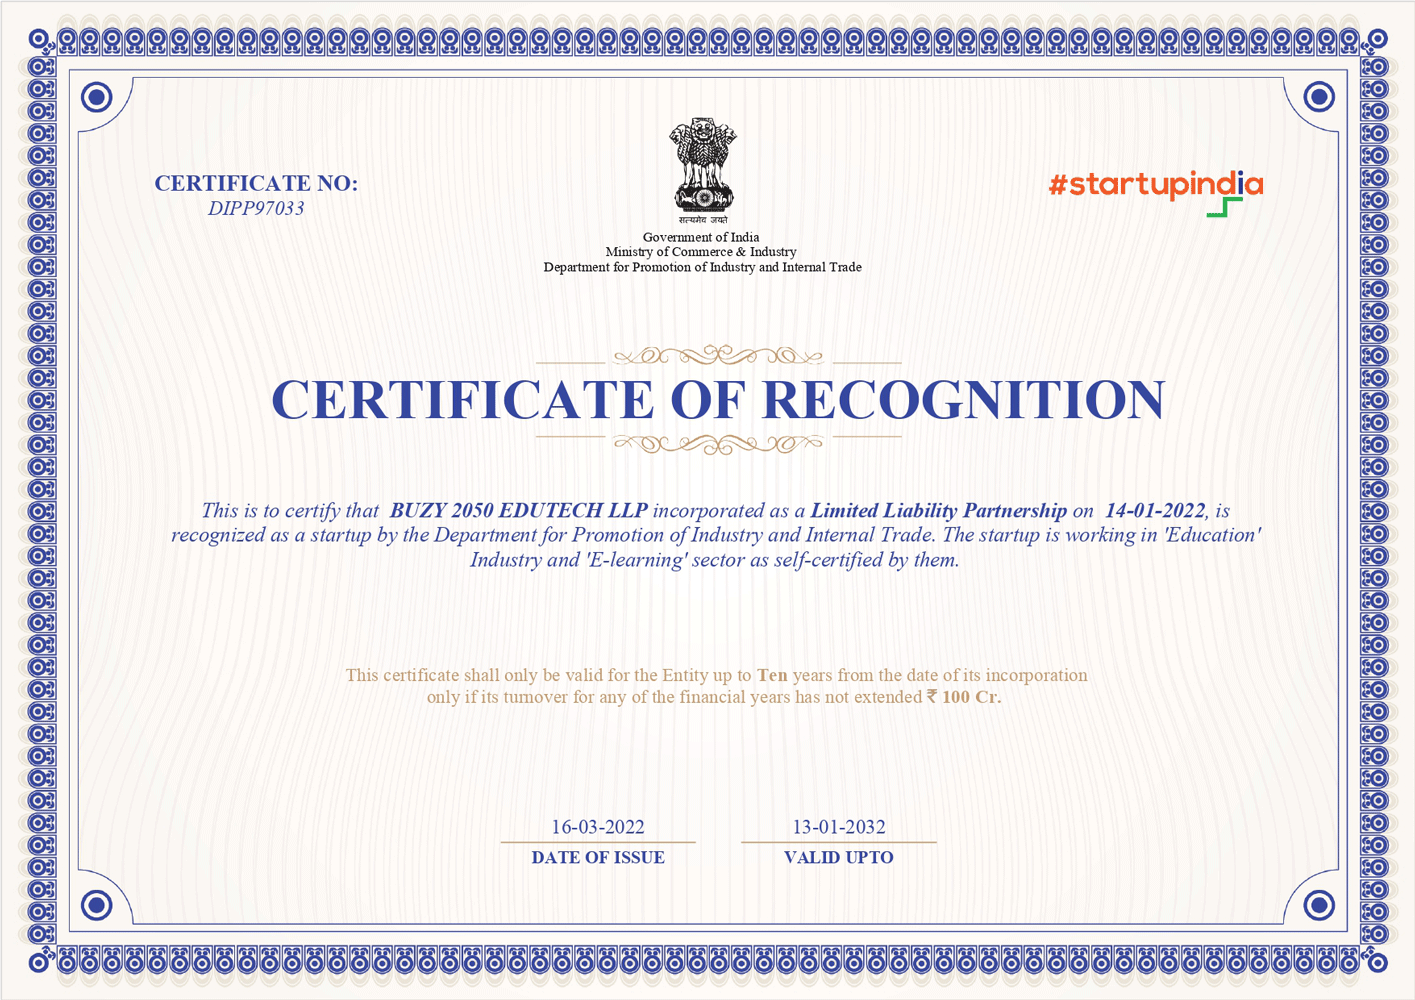 startup-india certificate - buzy2050 LLP